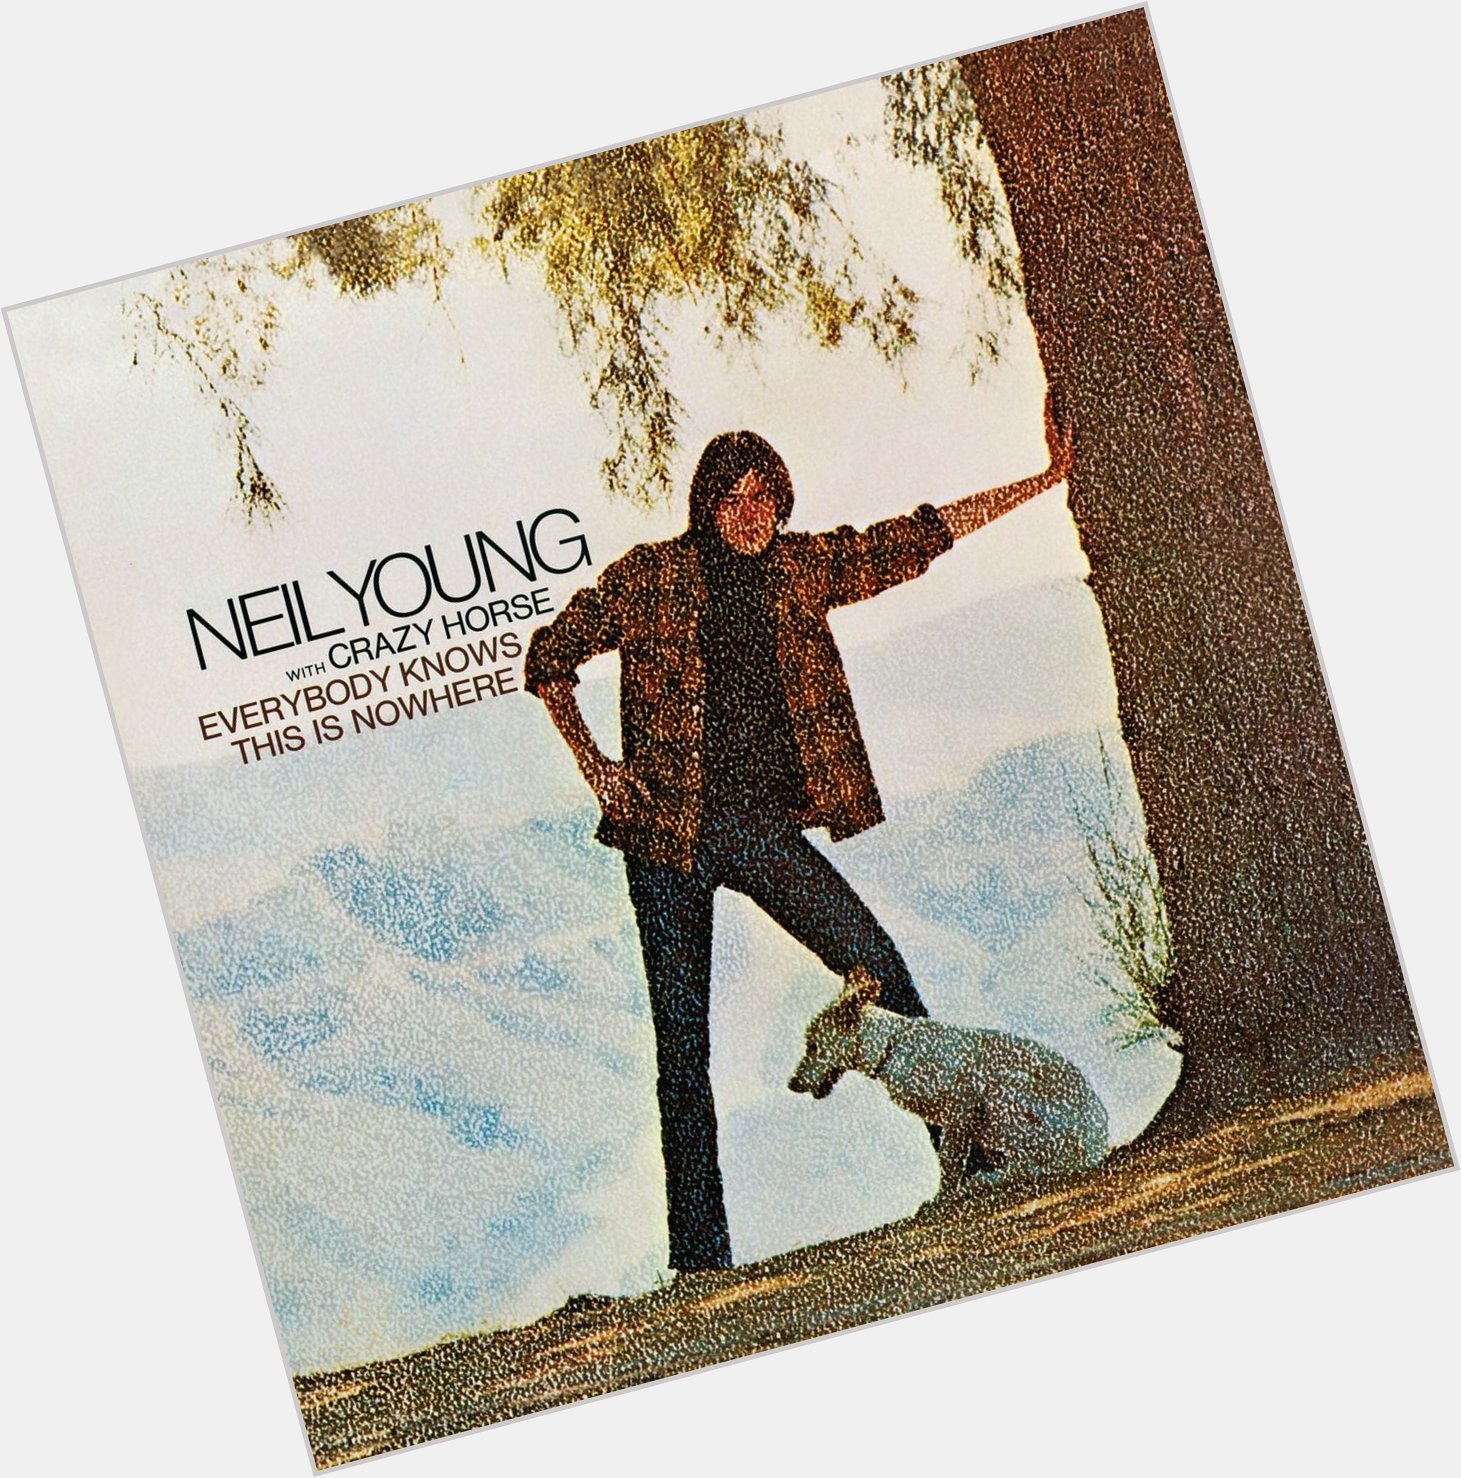 Happy 76th birthday to Neil Young today  